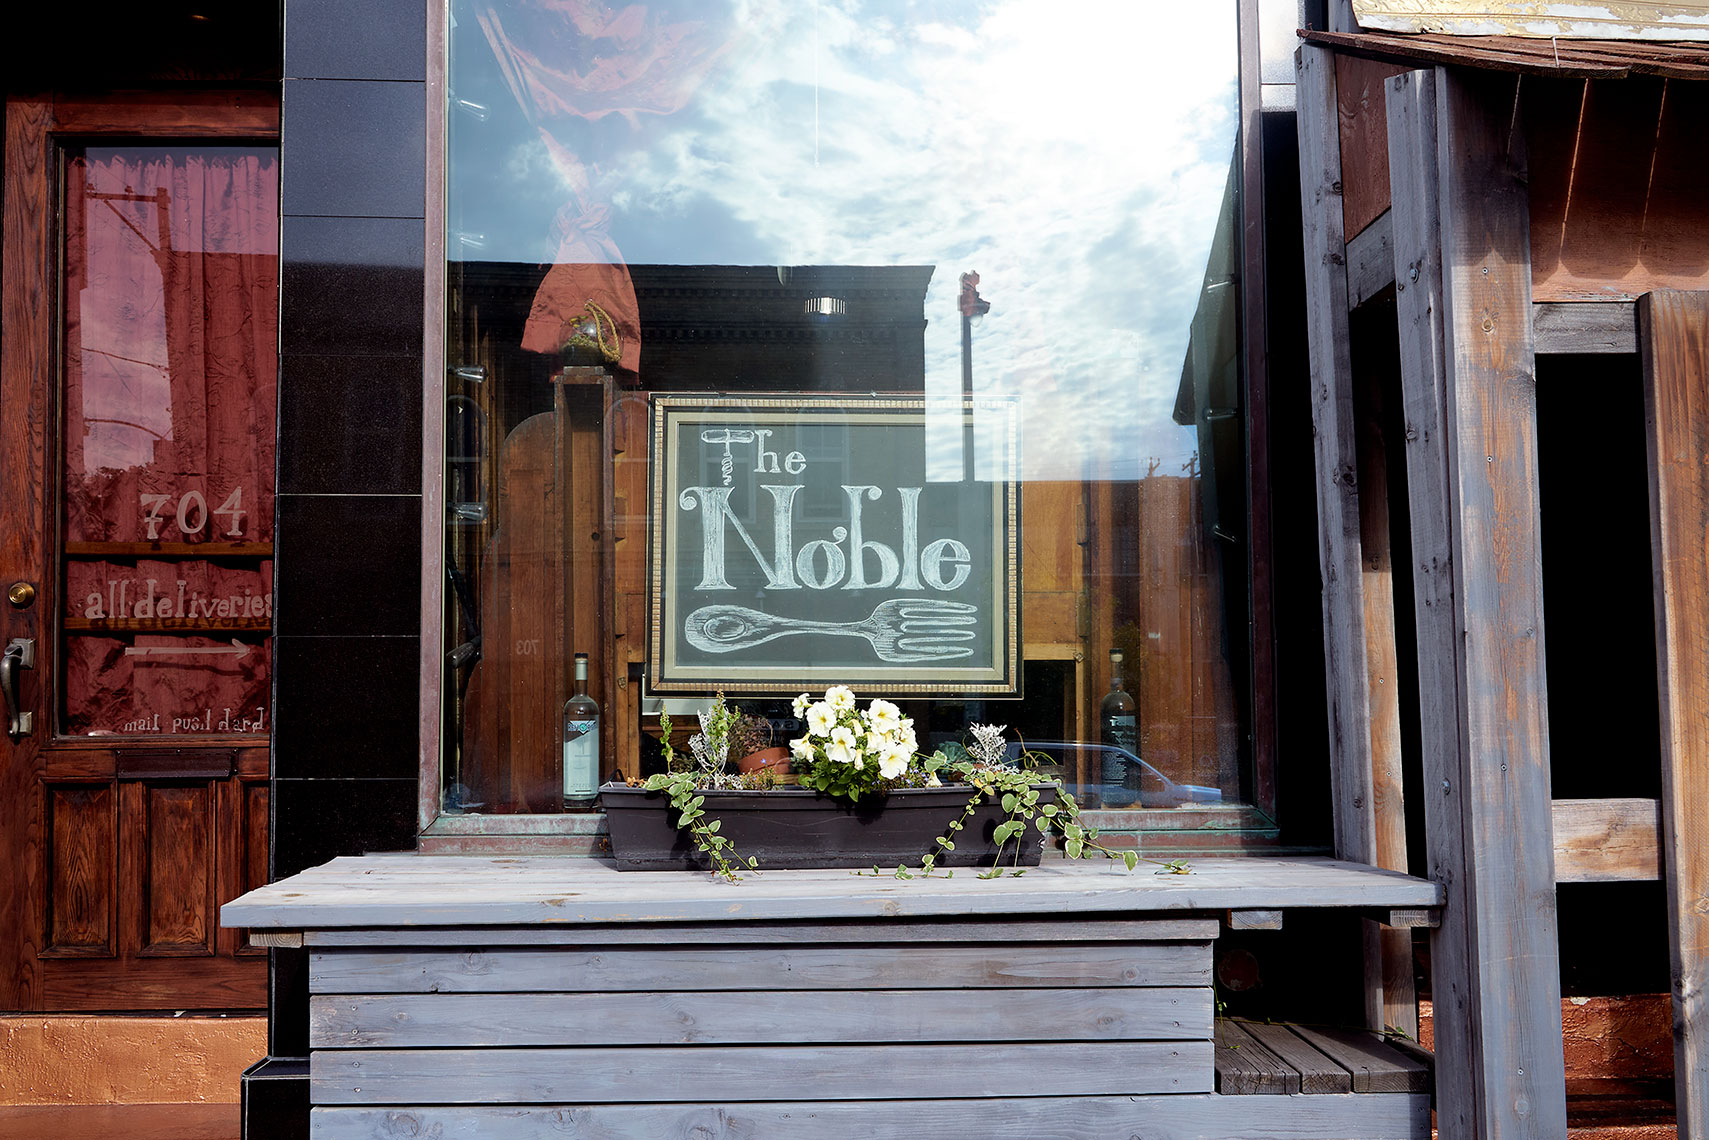 Editorial Photo of The Noble in Milwaukee for The Washignton Post.